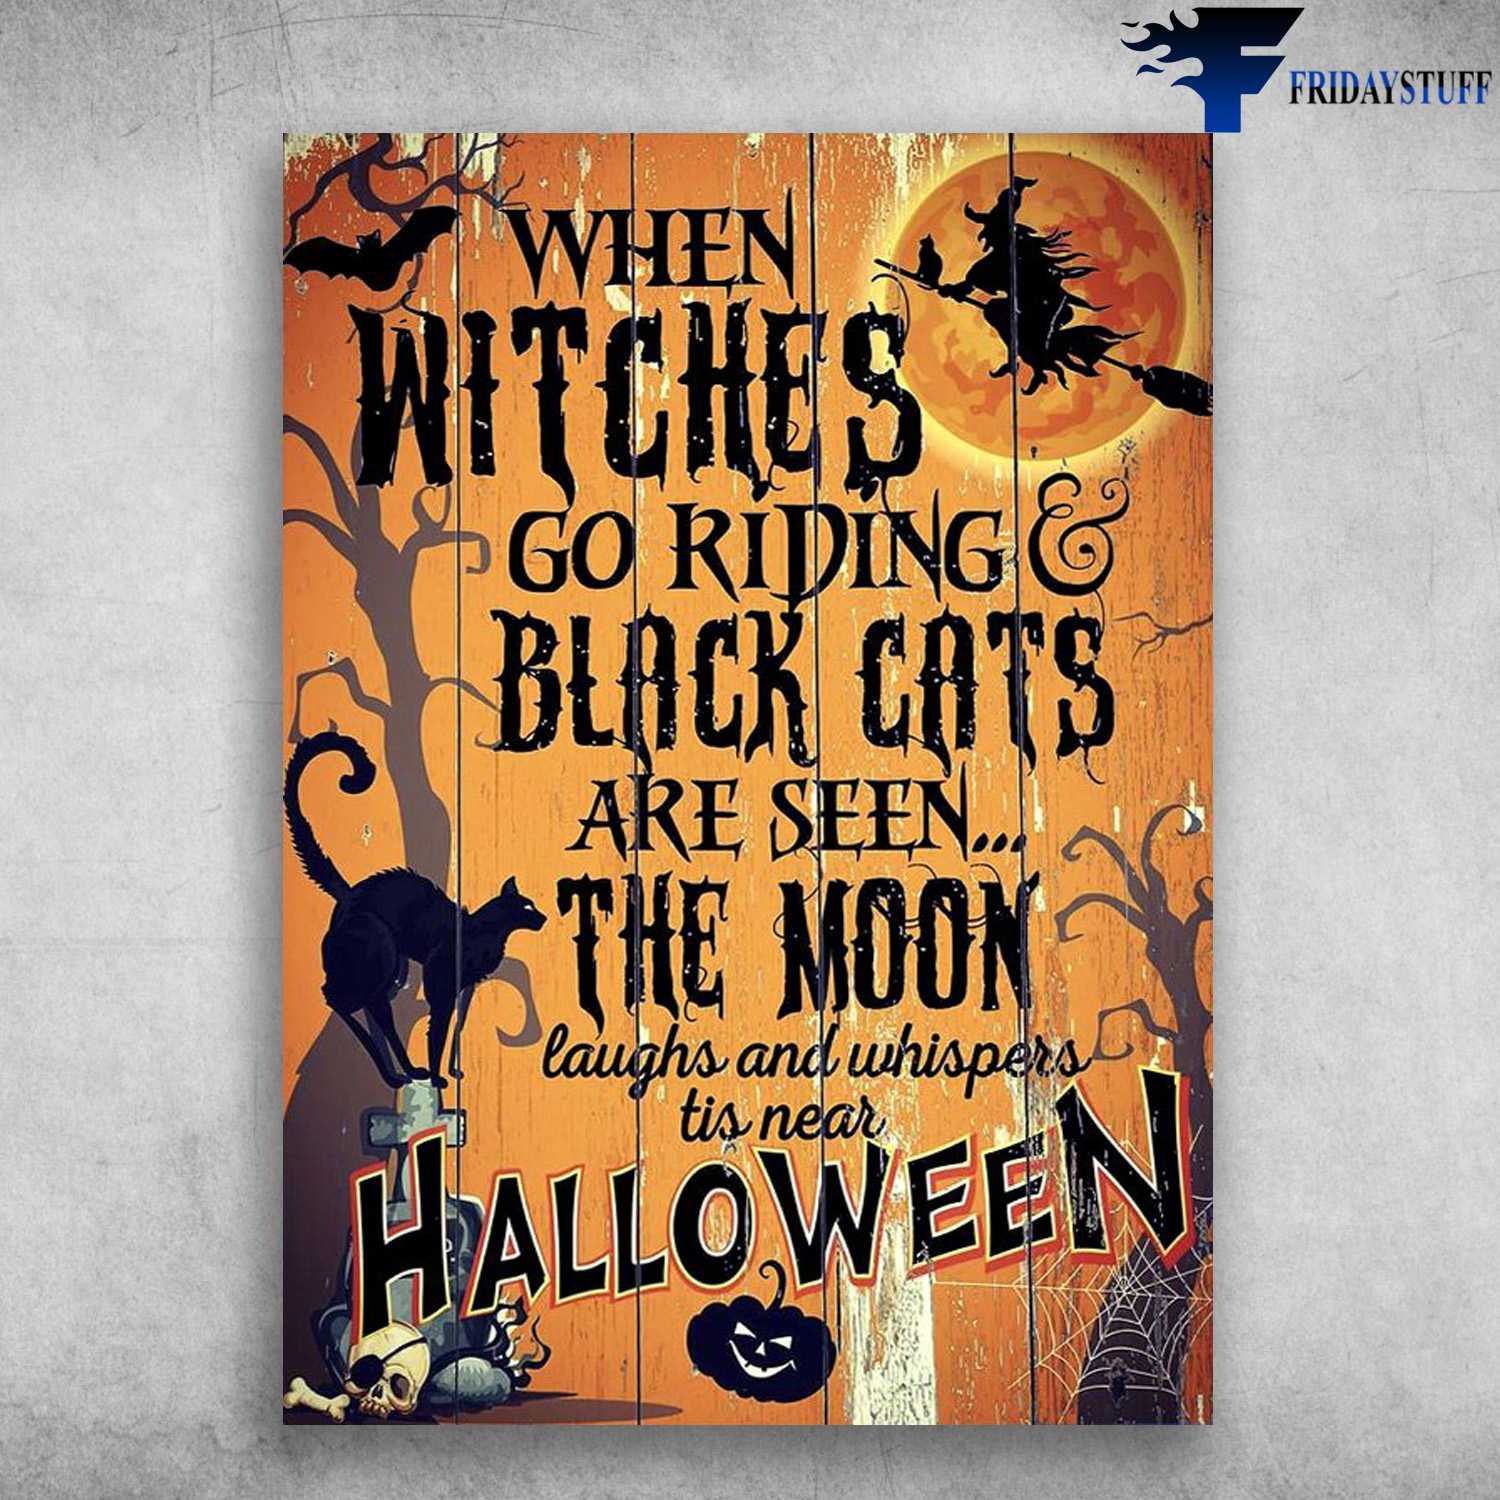 Black Cat And Witch - Halloween Day, When Witches Go Riding, And Black Cats Are Seen The Moon, Laughts And Whispers Tis Near Halloween